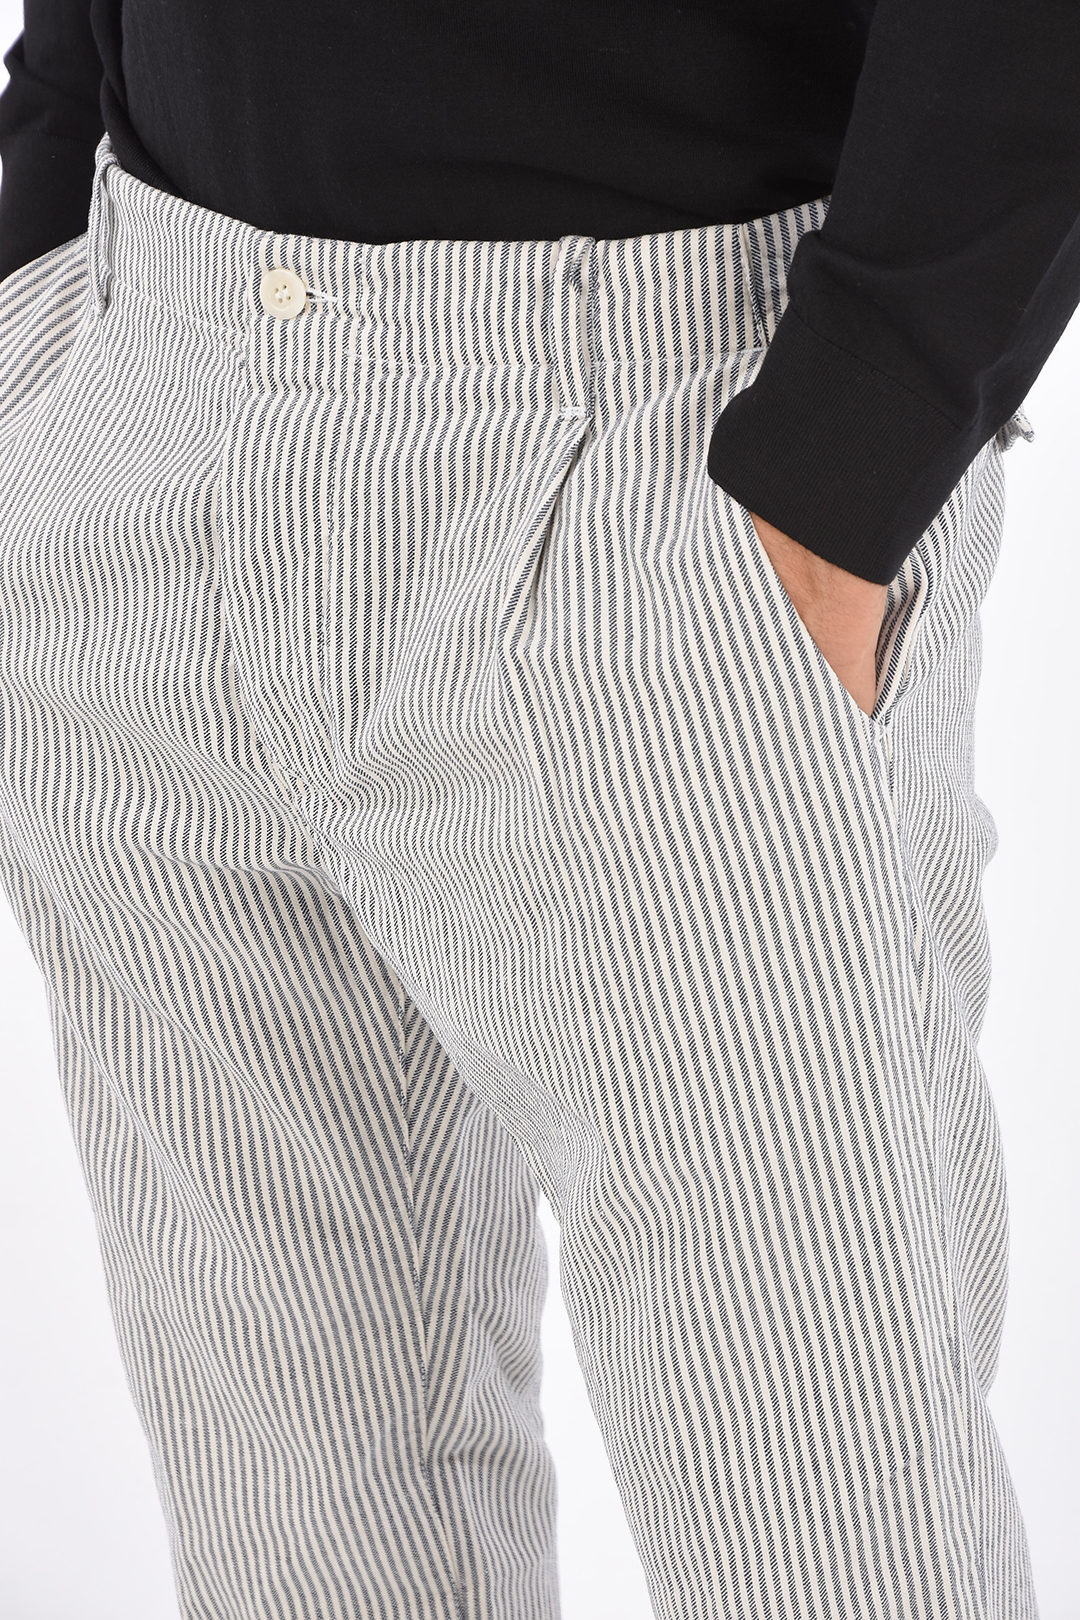 Mens Slim Fit Stripe Long Striped Trousers Mens For Casual And Sporty Wear,  Gym, Jogging, And Sweat Skinny Design Style 2245 From Uikta, $27.97 |  DHgate.Com